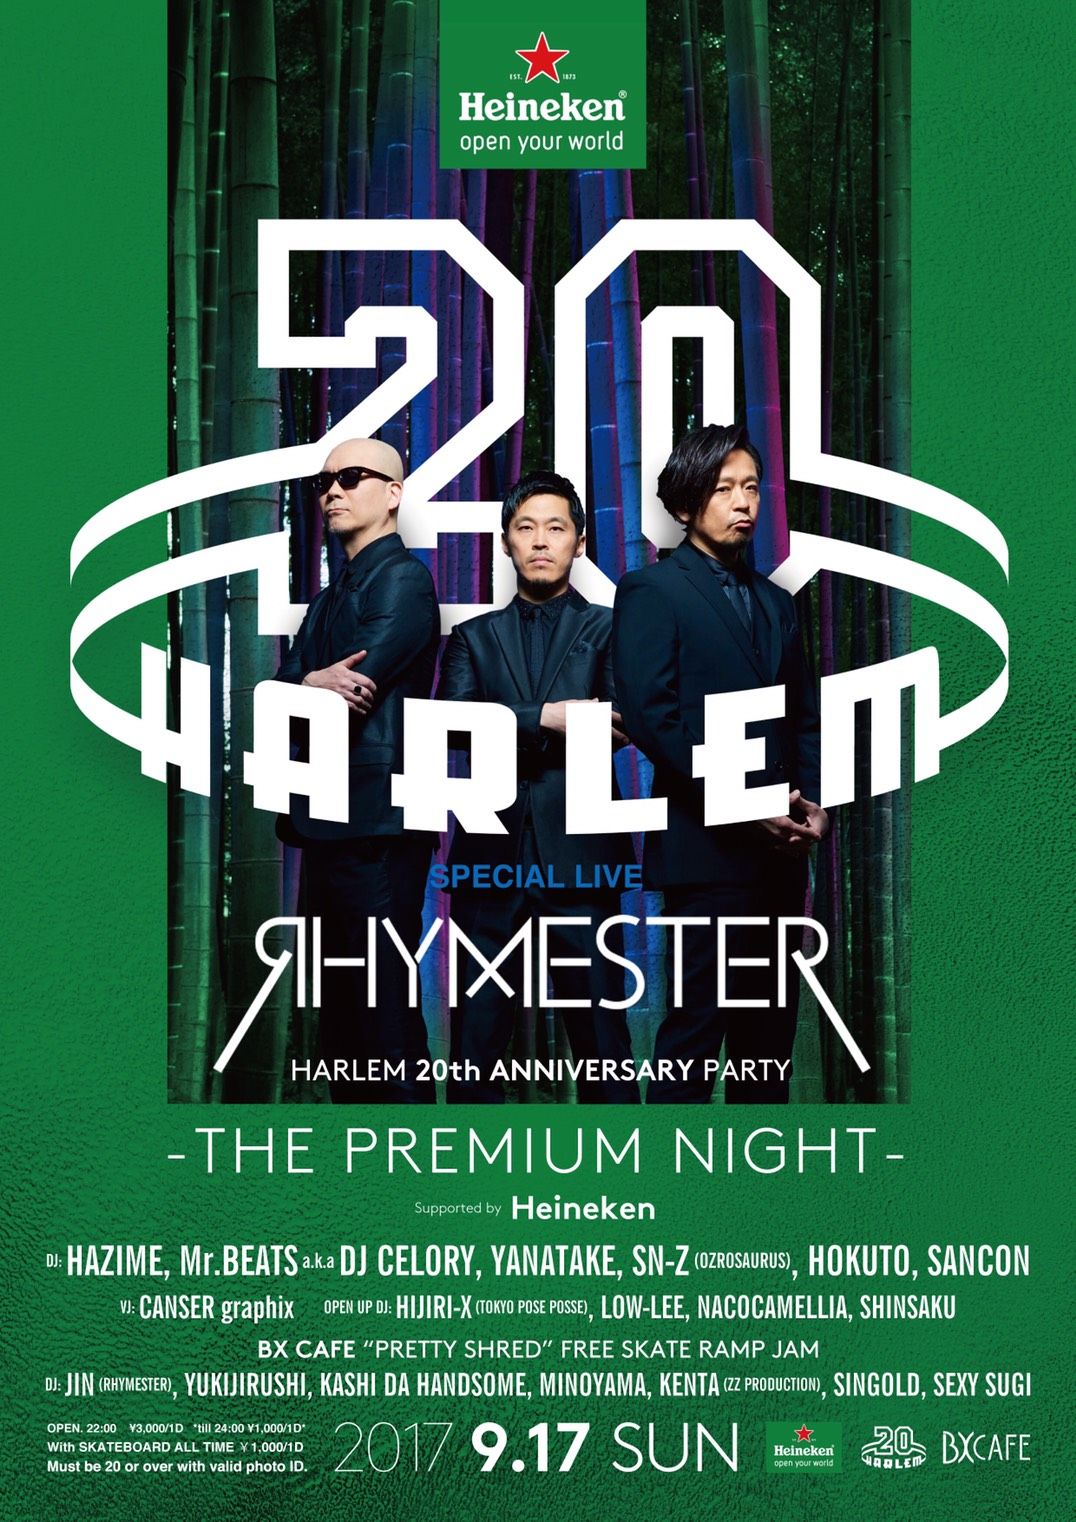 HARLEM 20th ANNIVERSARY PARTY -THE PREMIUM NIGHT- supported by Heineken